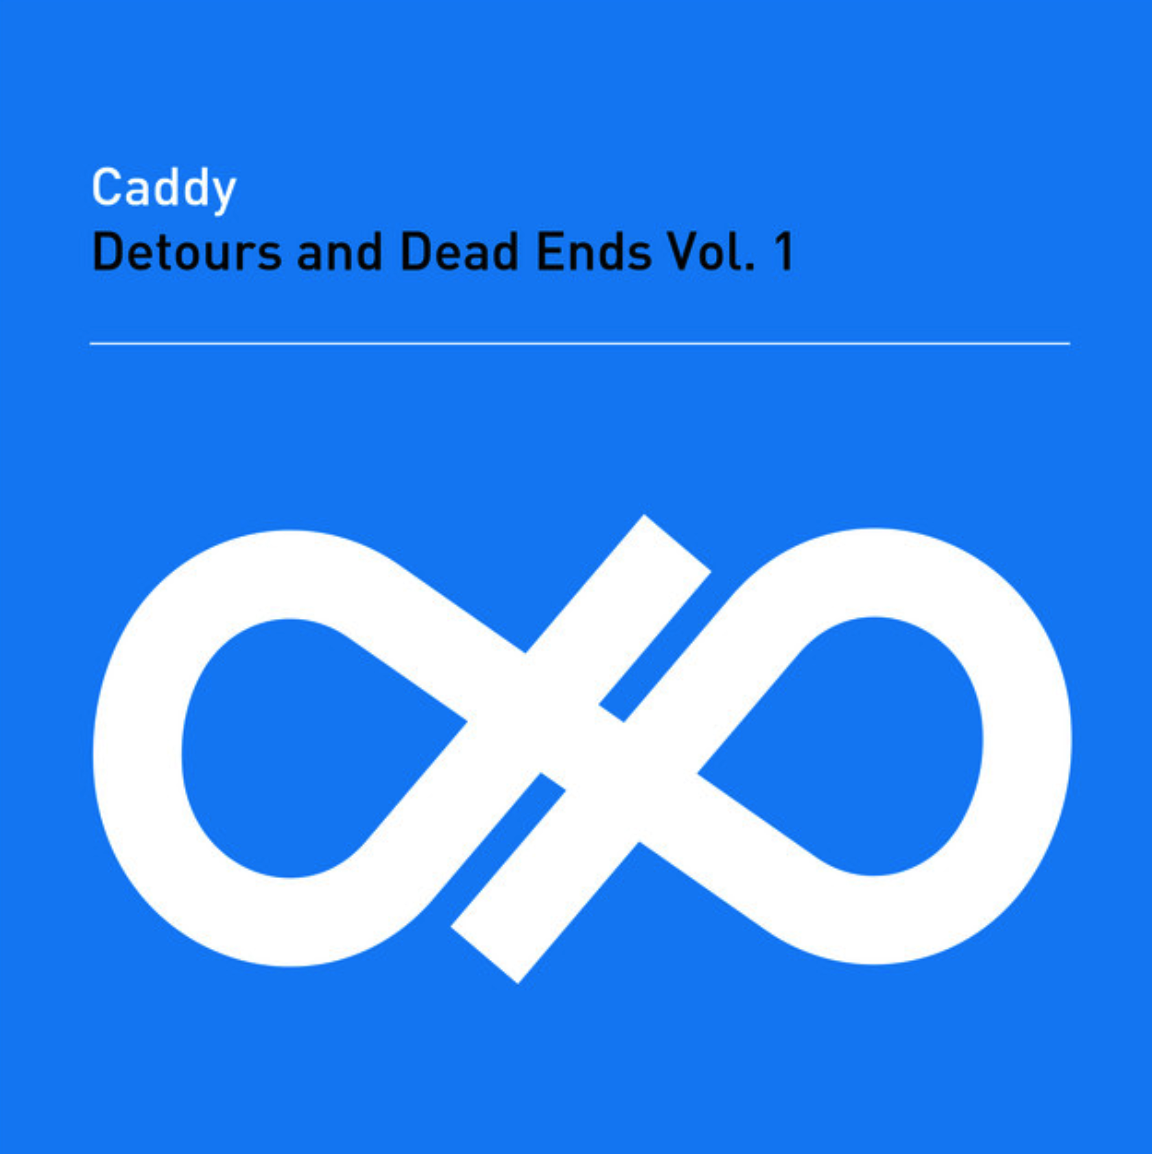 Caddy – Detours and Dead Ends Vol. 1 (CD, 2021)